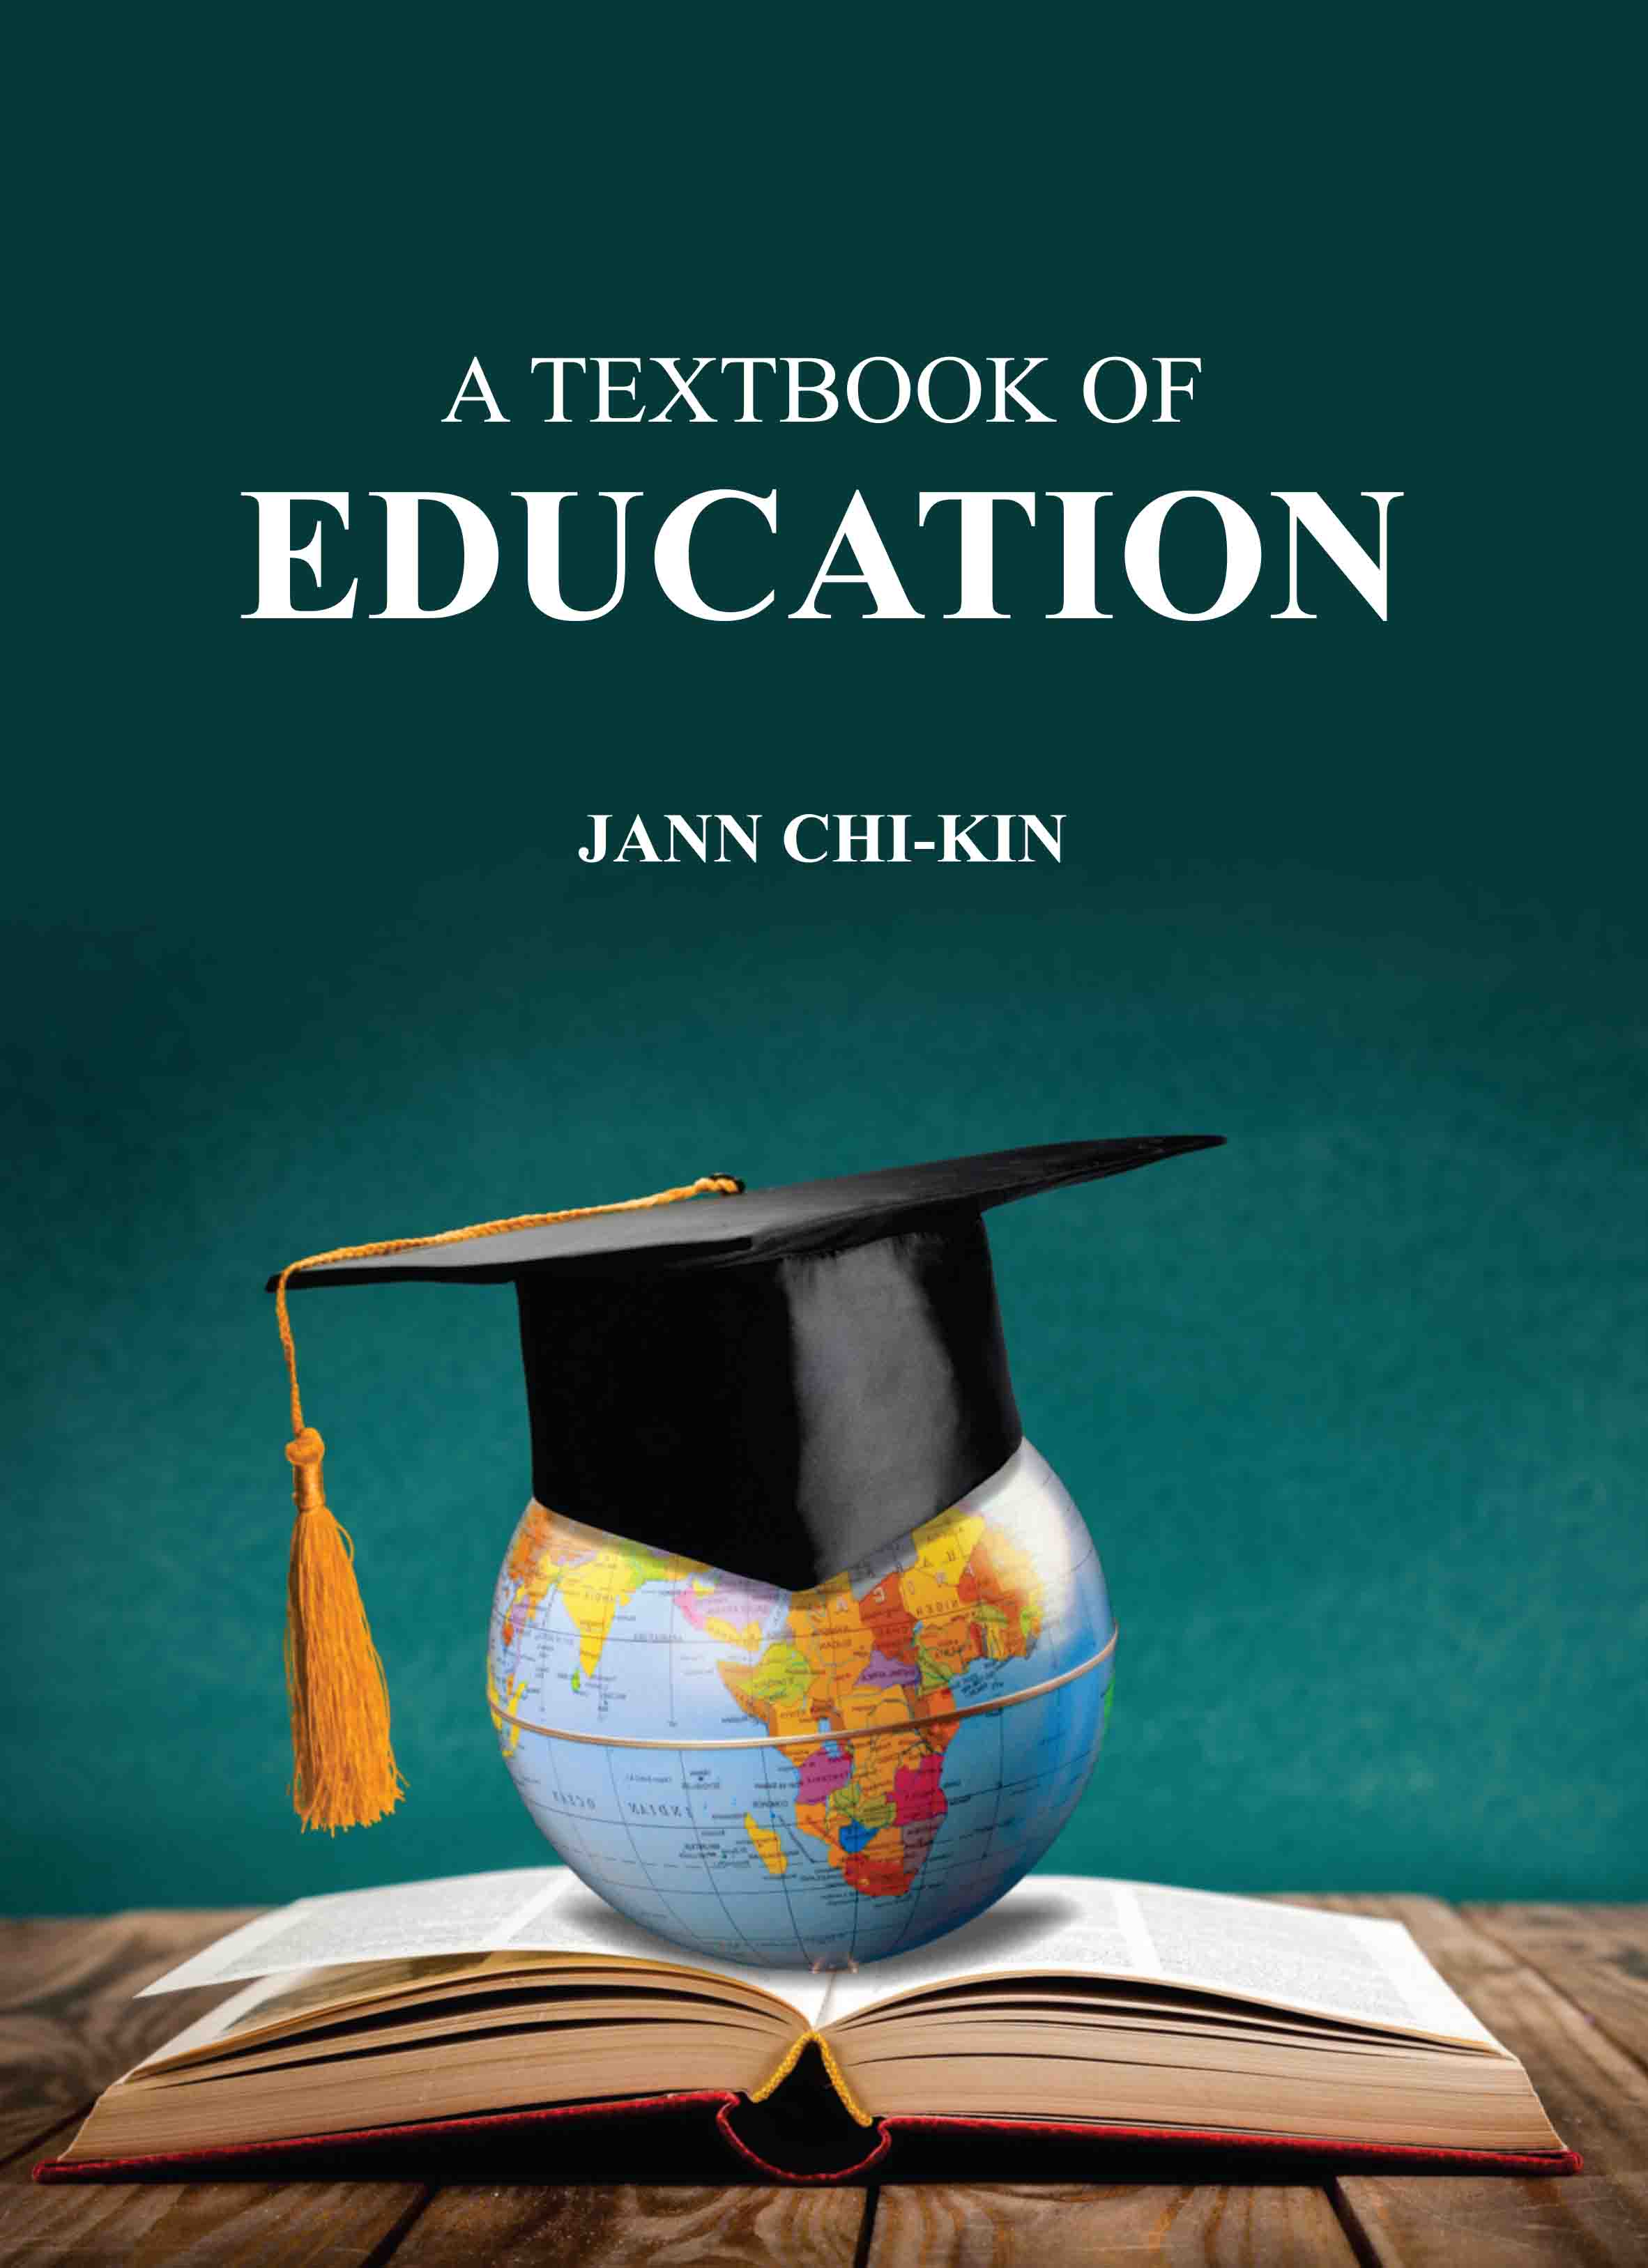 A Textbook of Education